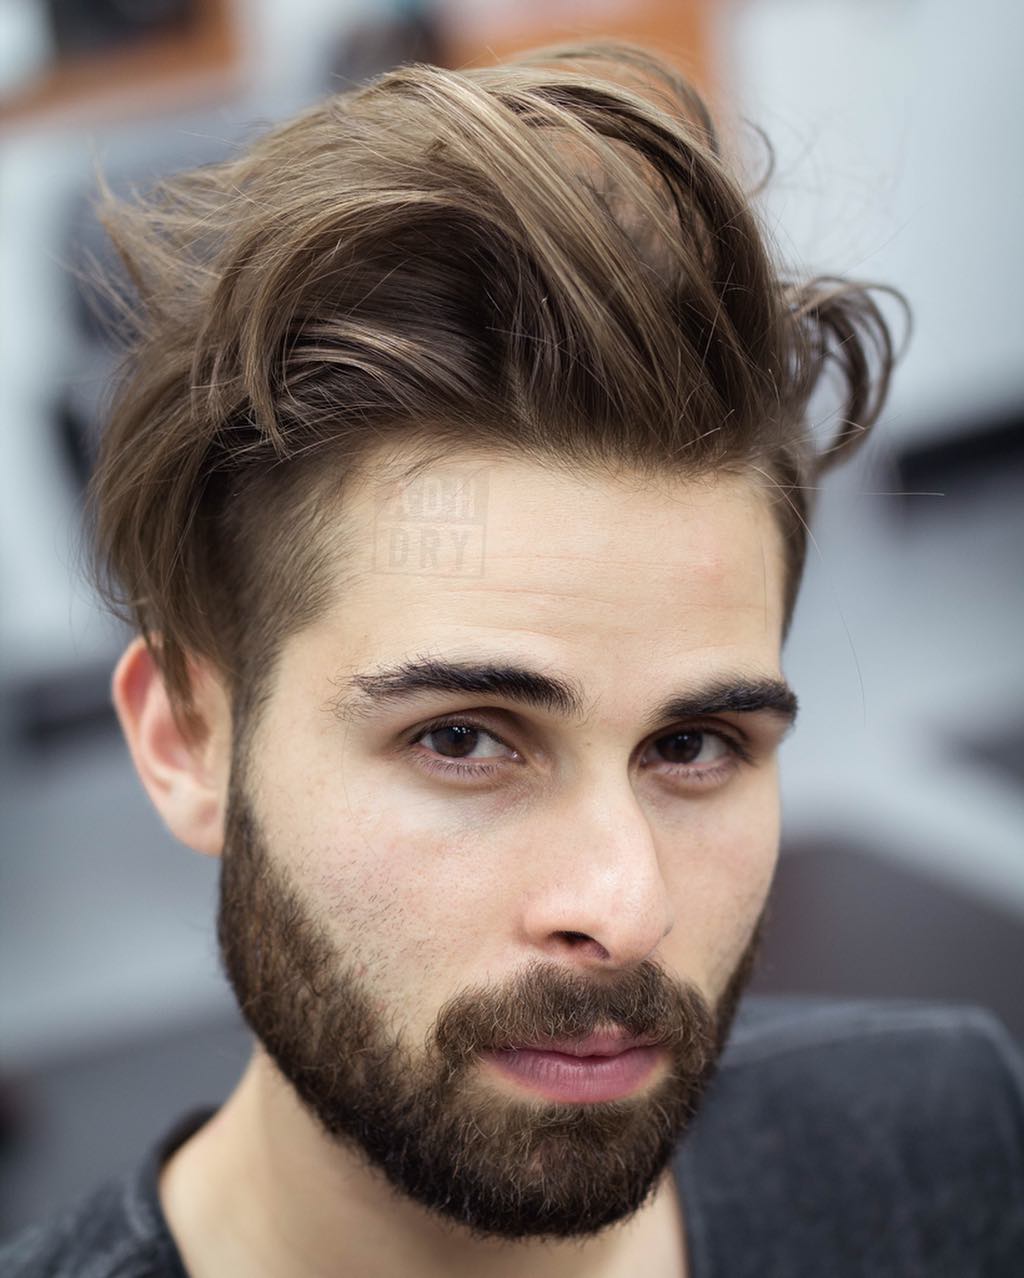 How To Grow Your Hair Out (Men's Tutorial)